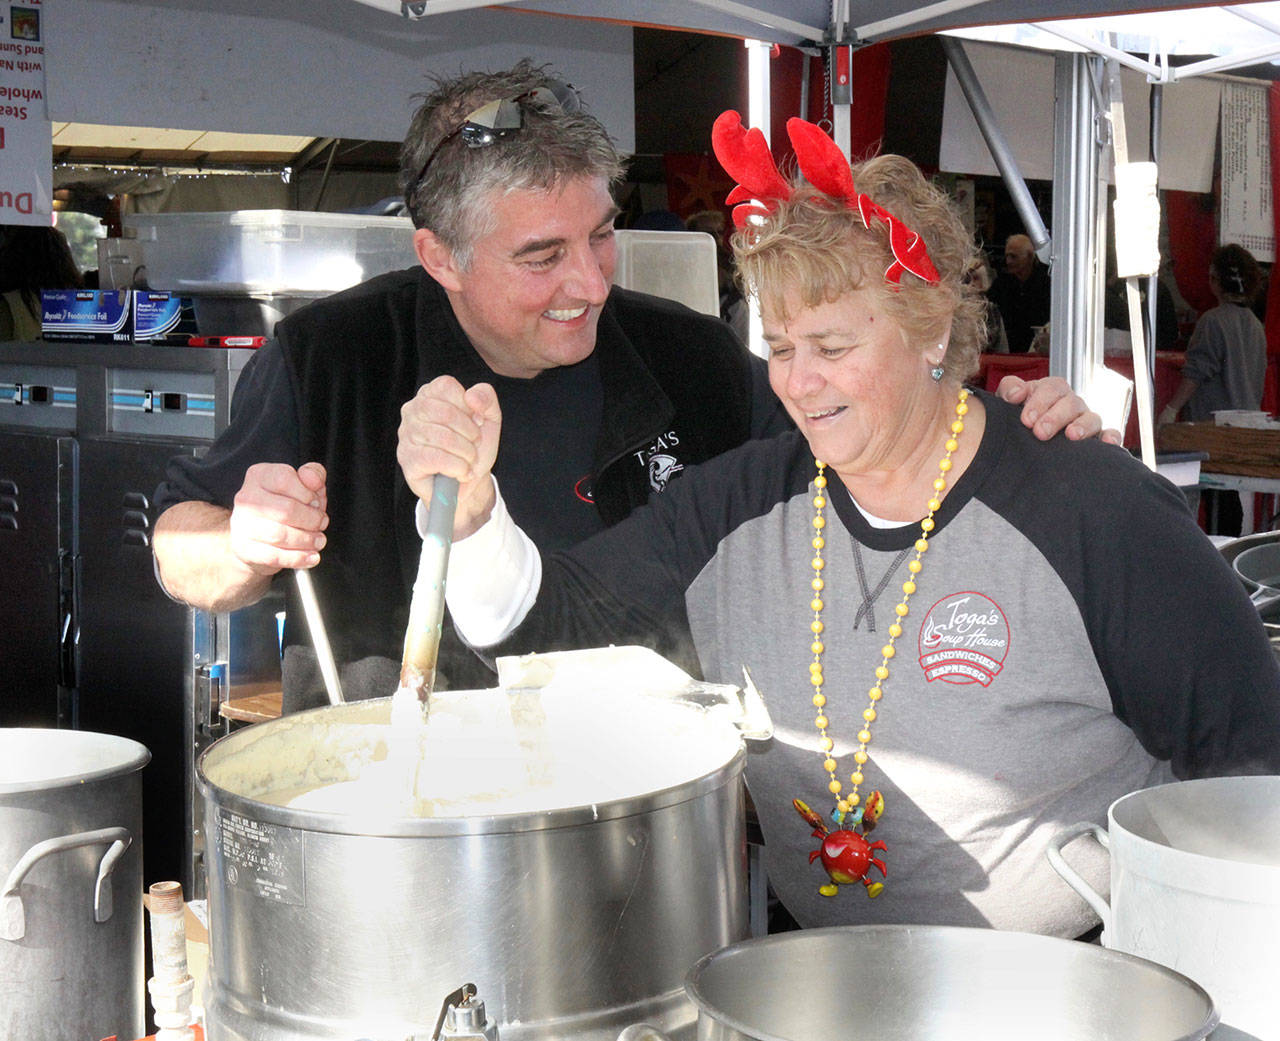 Dave Logan/For Peninsula Daily News Diana Losch, right, volunteers at CrabFest one last time, stirring a pot with friend Toga Hertzog.